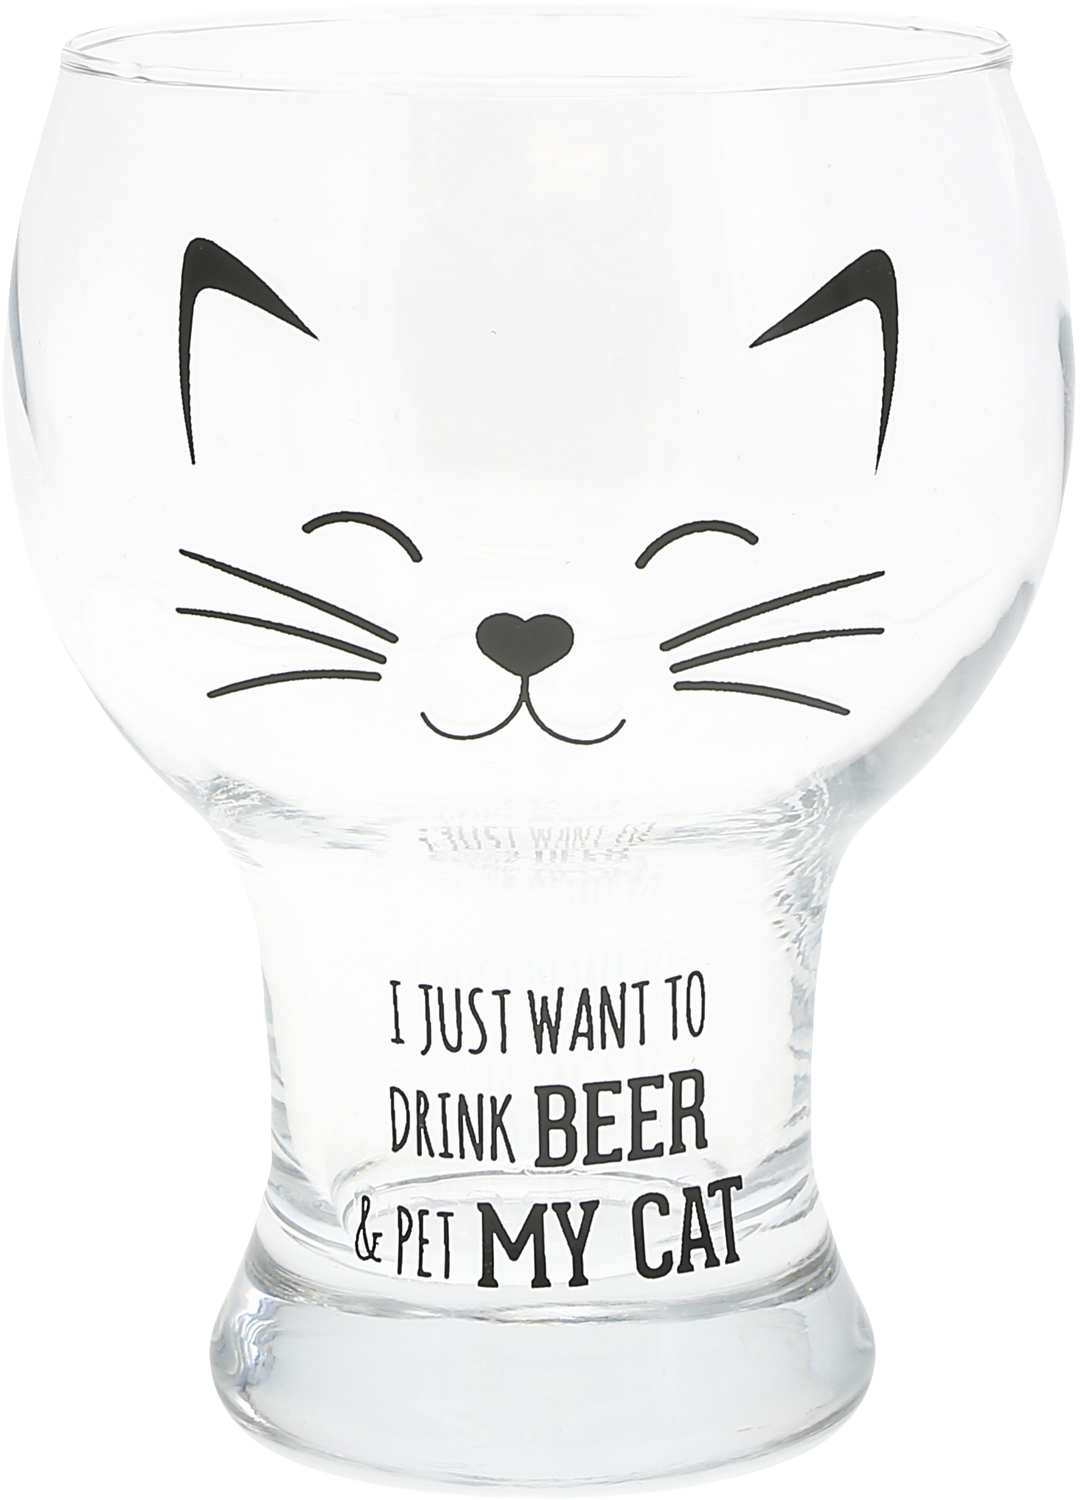 My Cat by We Pets - My Cat - 15 oz Pilsner Glass